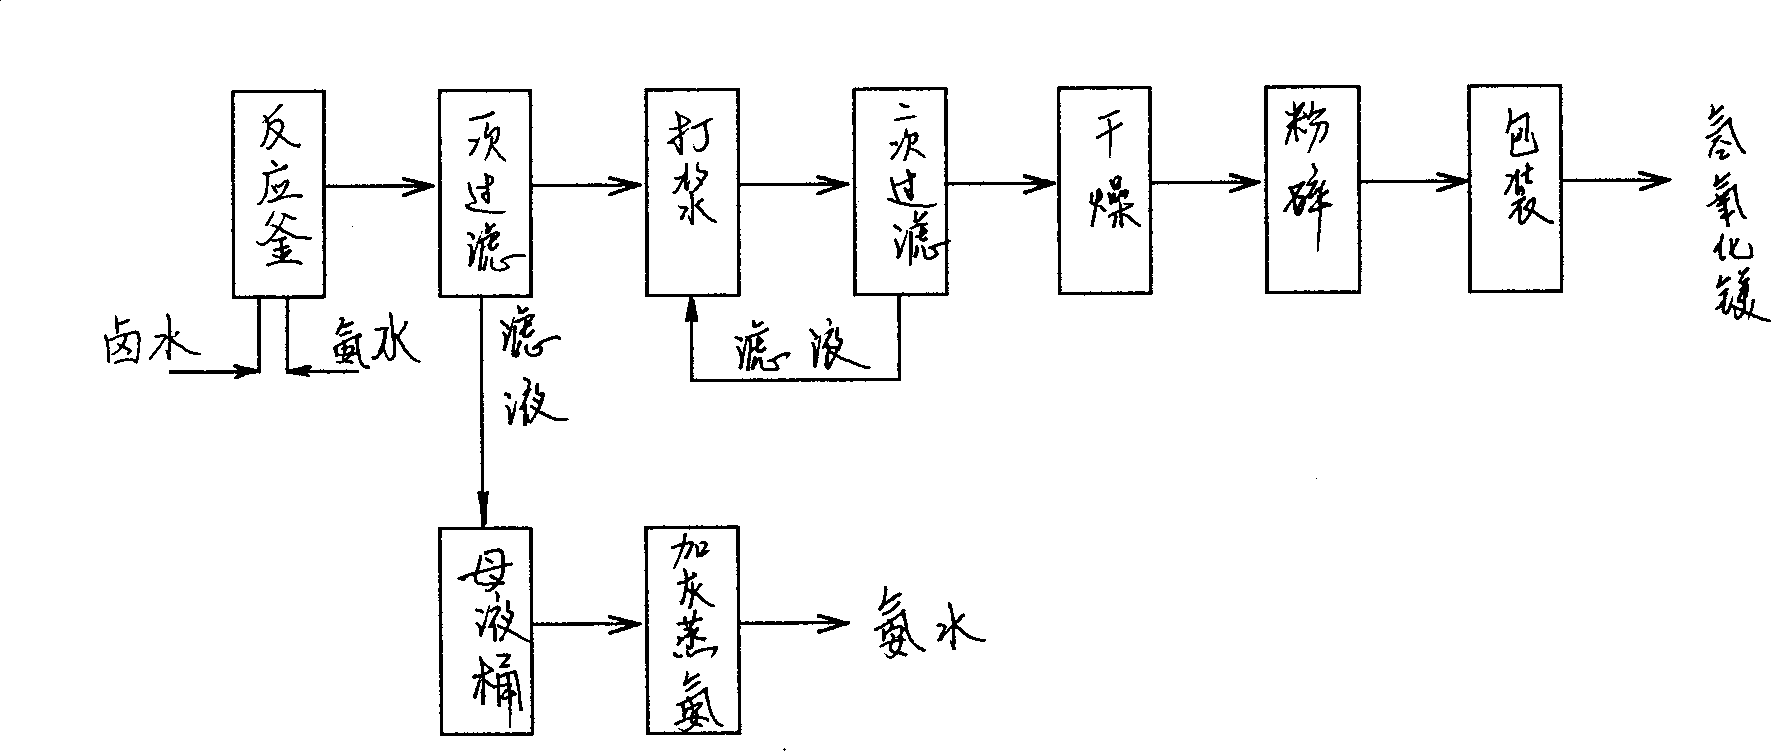 One-step process of producing magnesium hydroxide